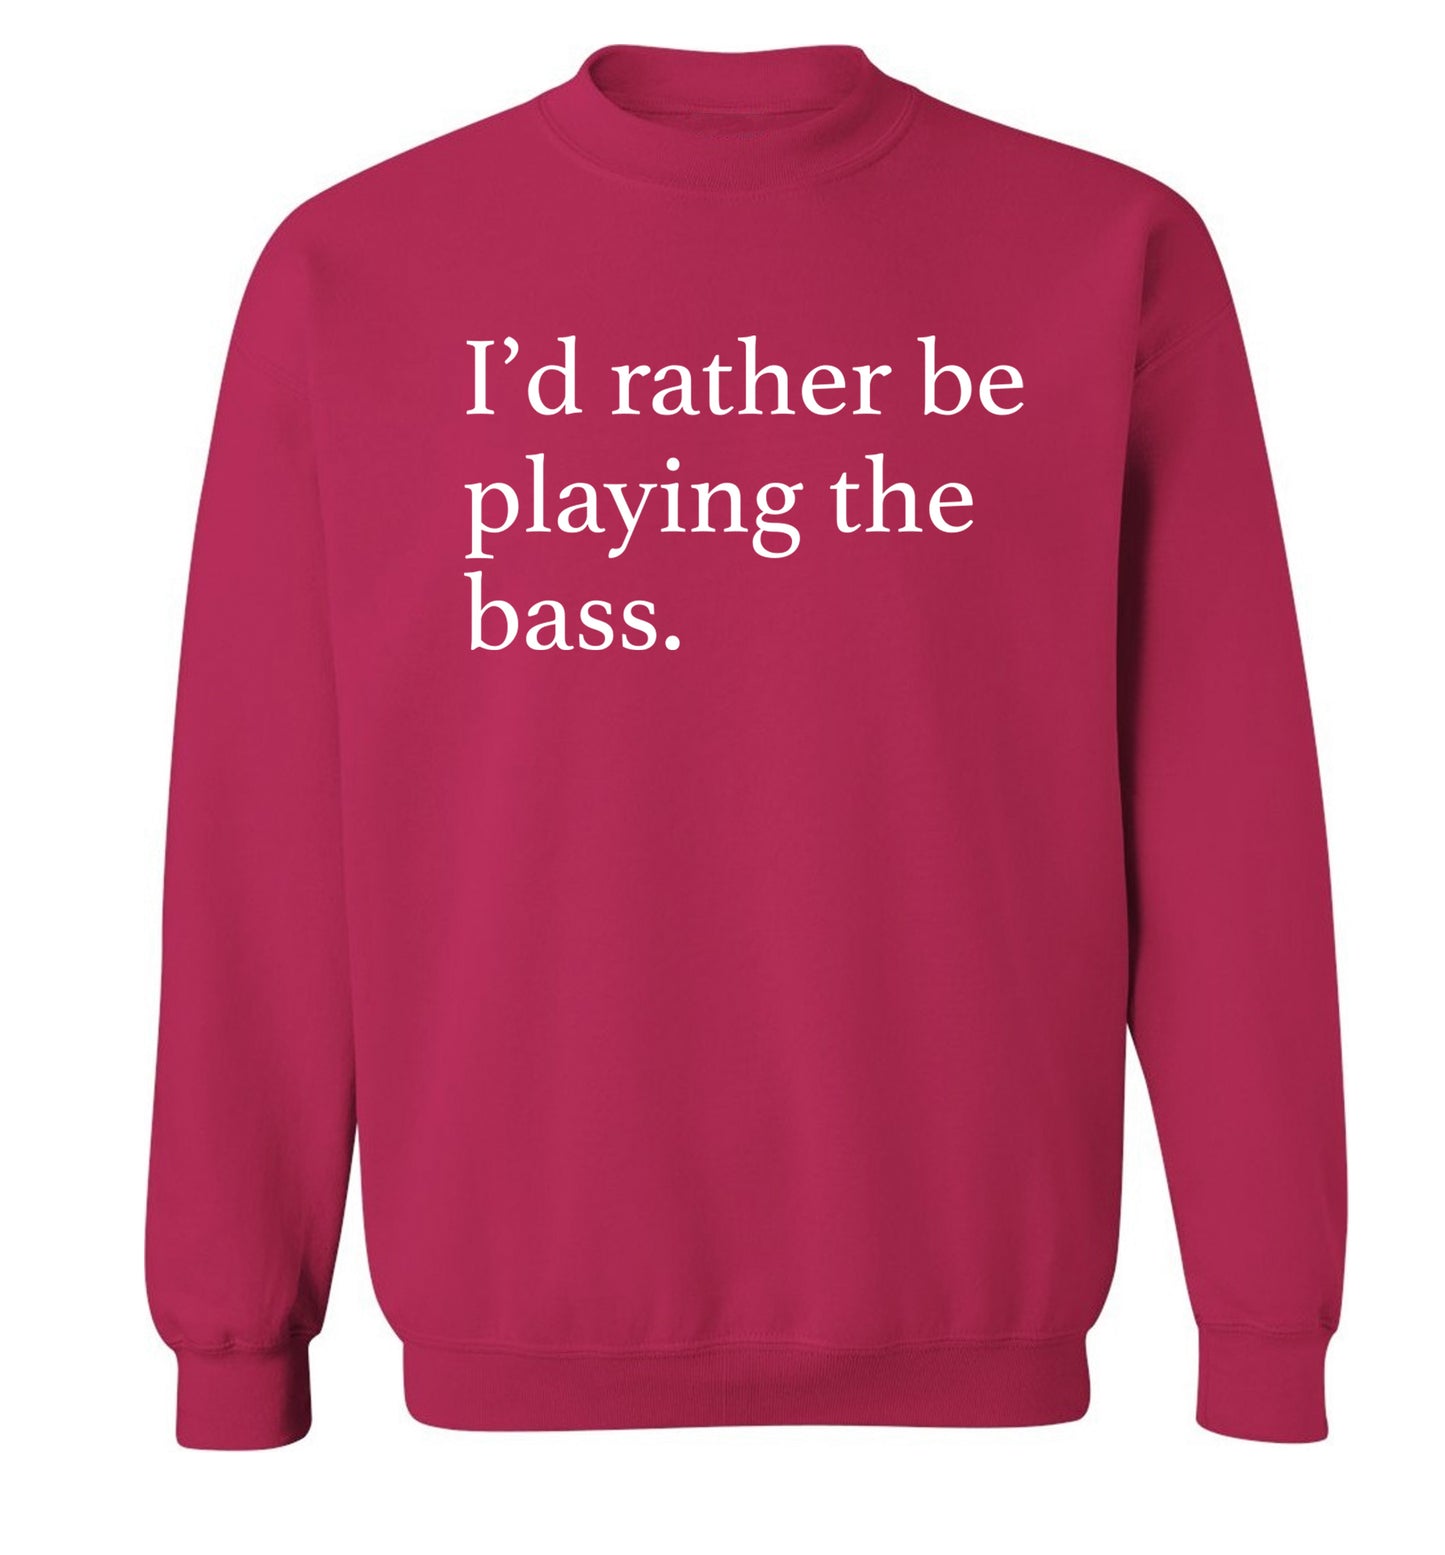 I'd rather by playing the bass Adult's unisex pink Sweater 2XL